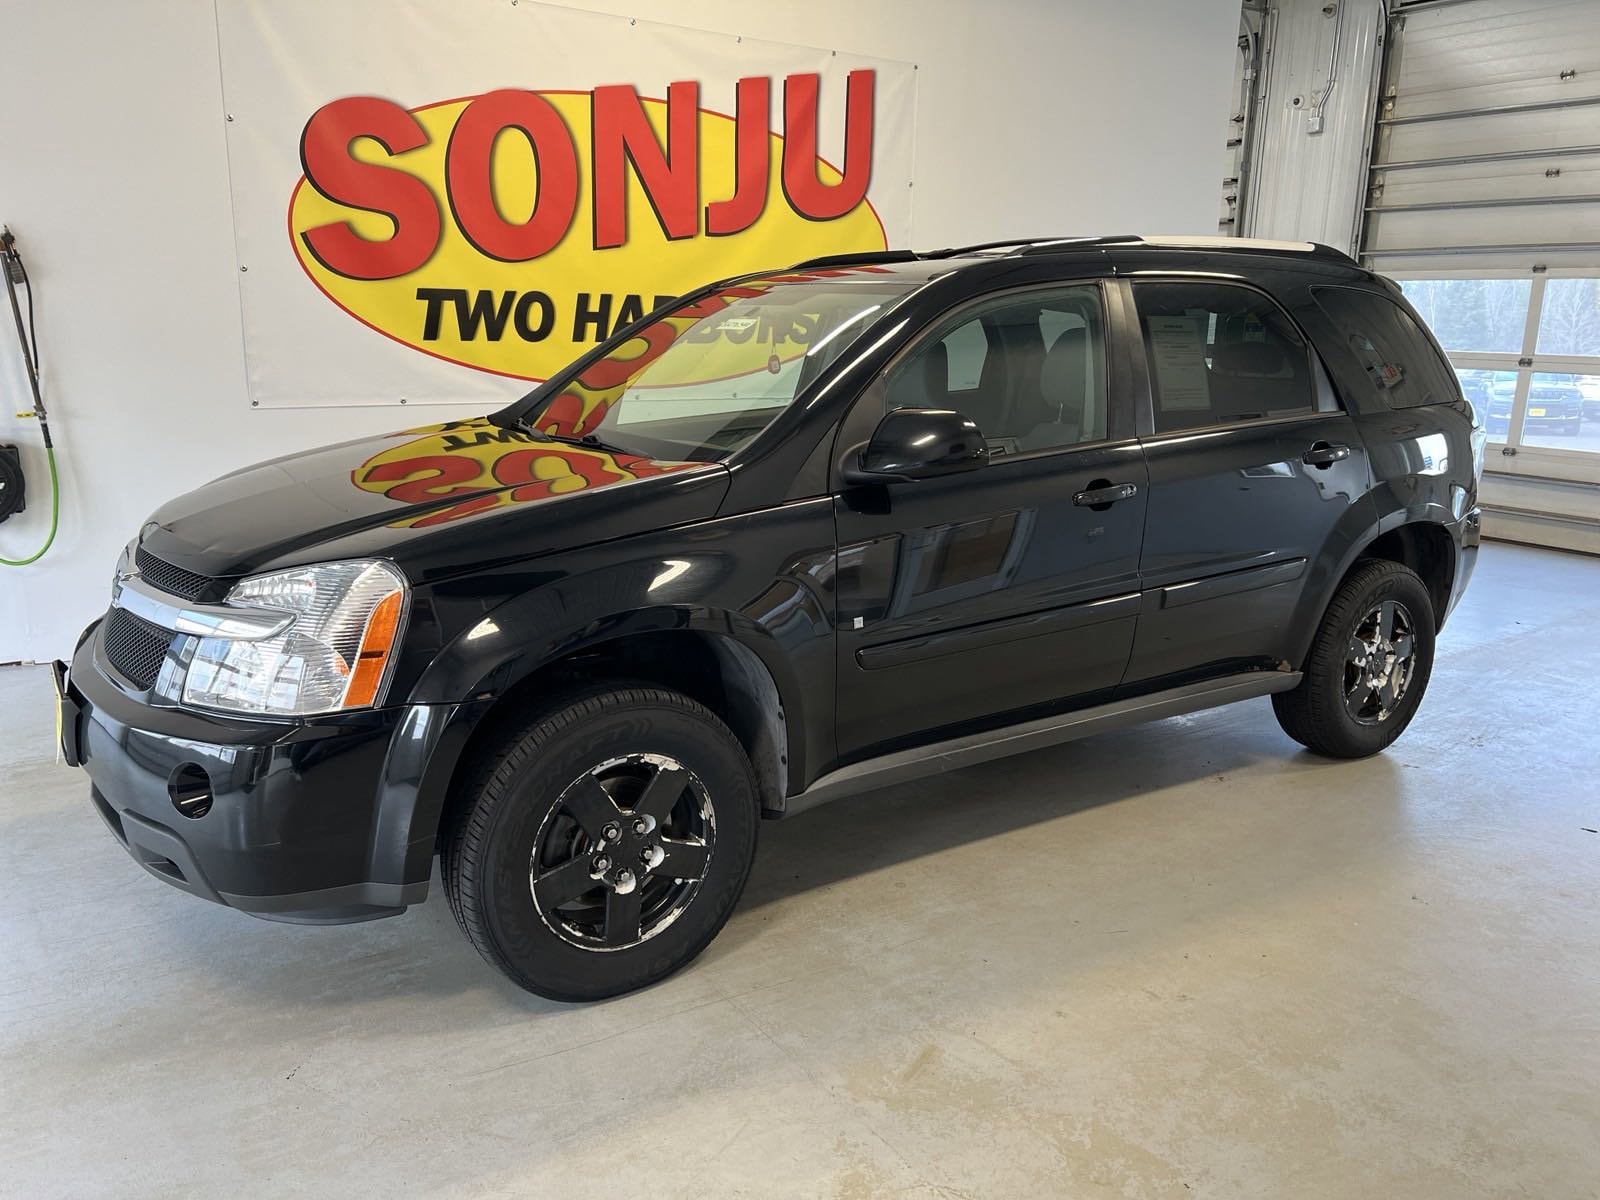 Used 2008 Chevrolet Equinox LT with VIN 2CNDL43F886076399 for sale in Two Harbors, Minnesota